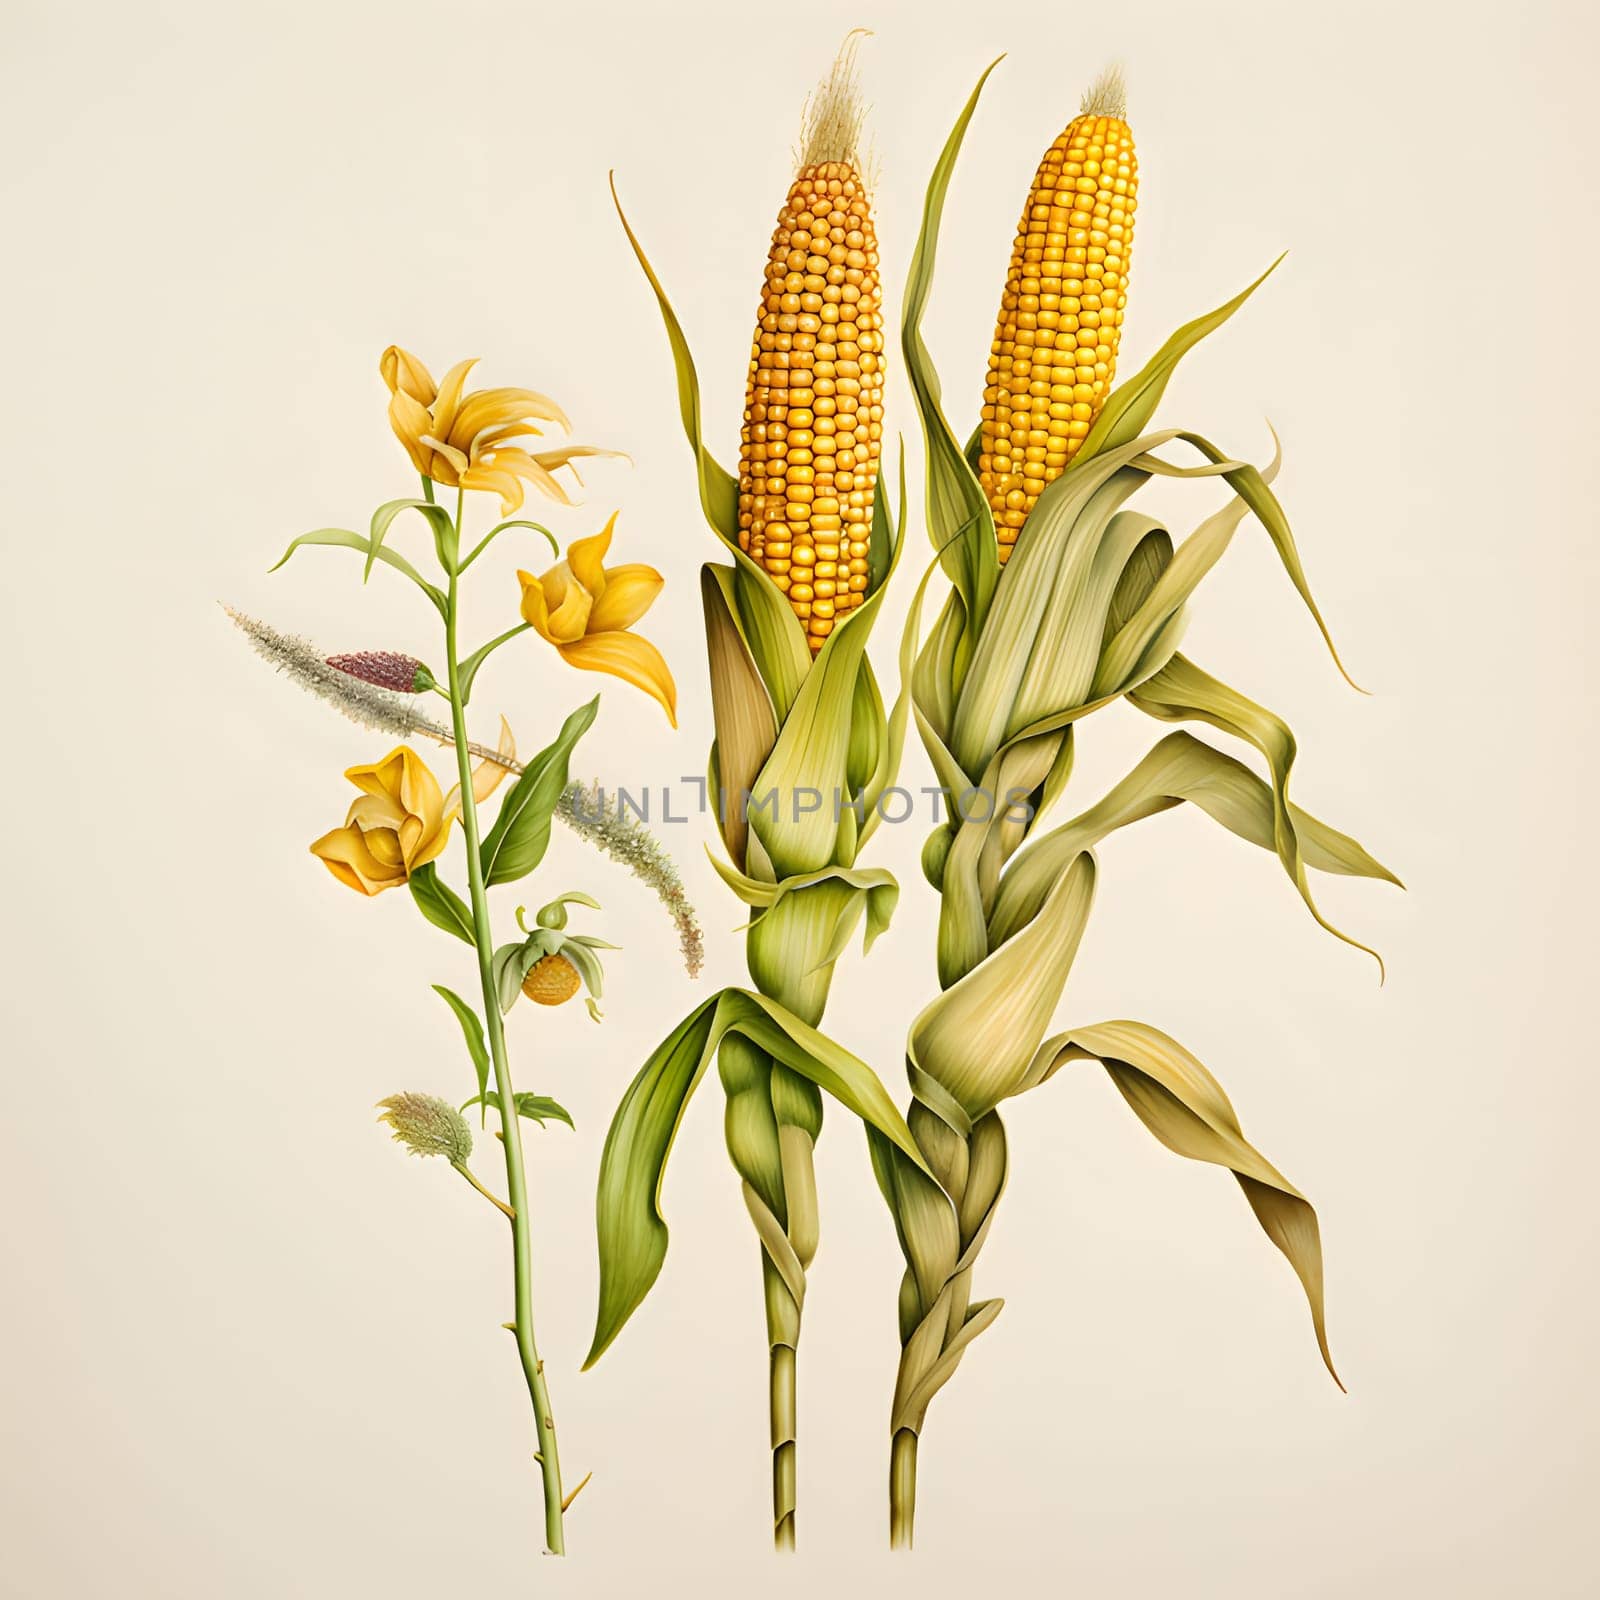 Corn cob with a flower isolated on a solid light background. Corn as a dish of thanksgiving for the harvest. by ThemesS